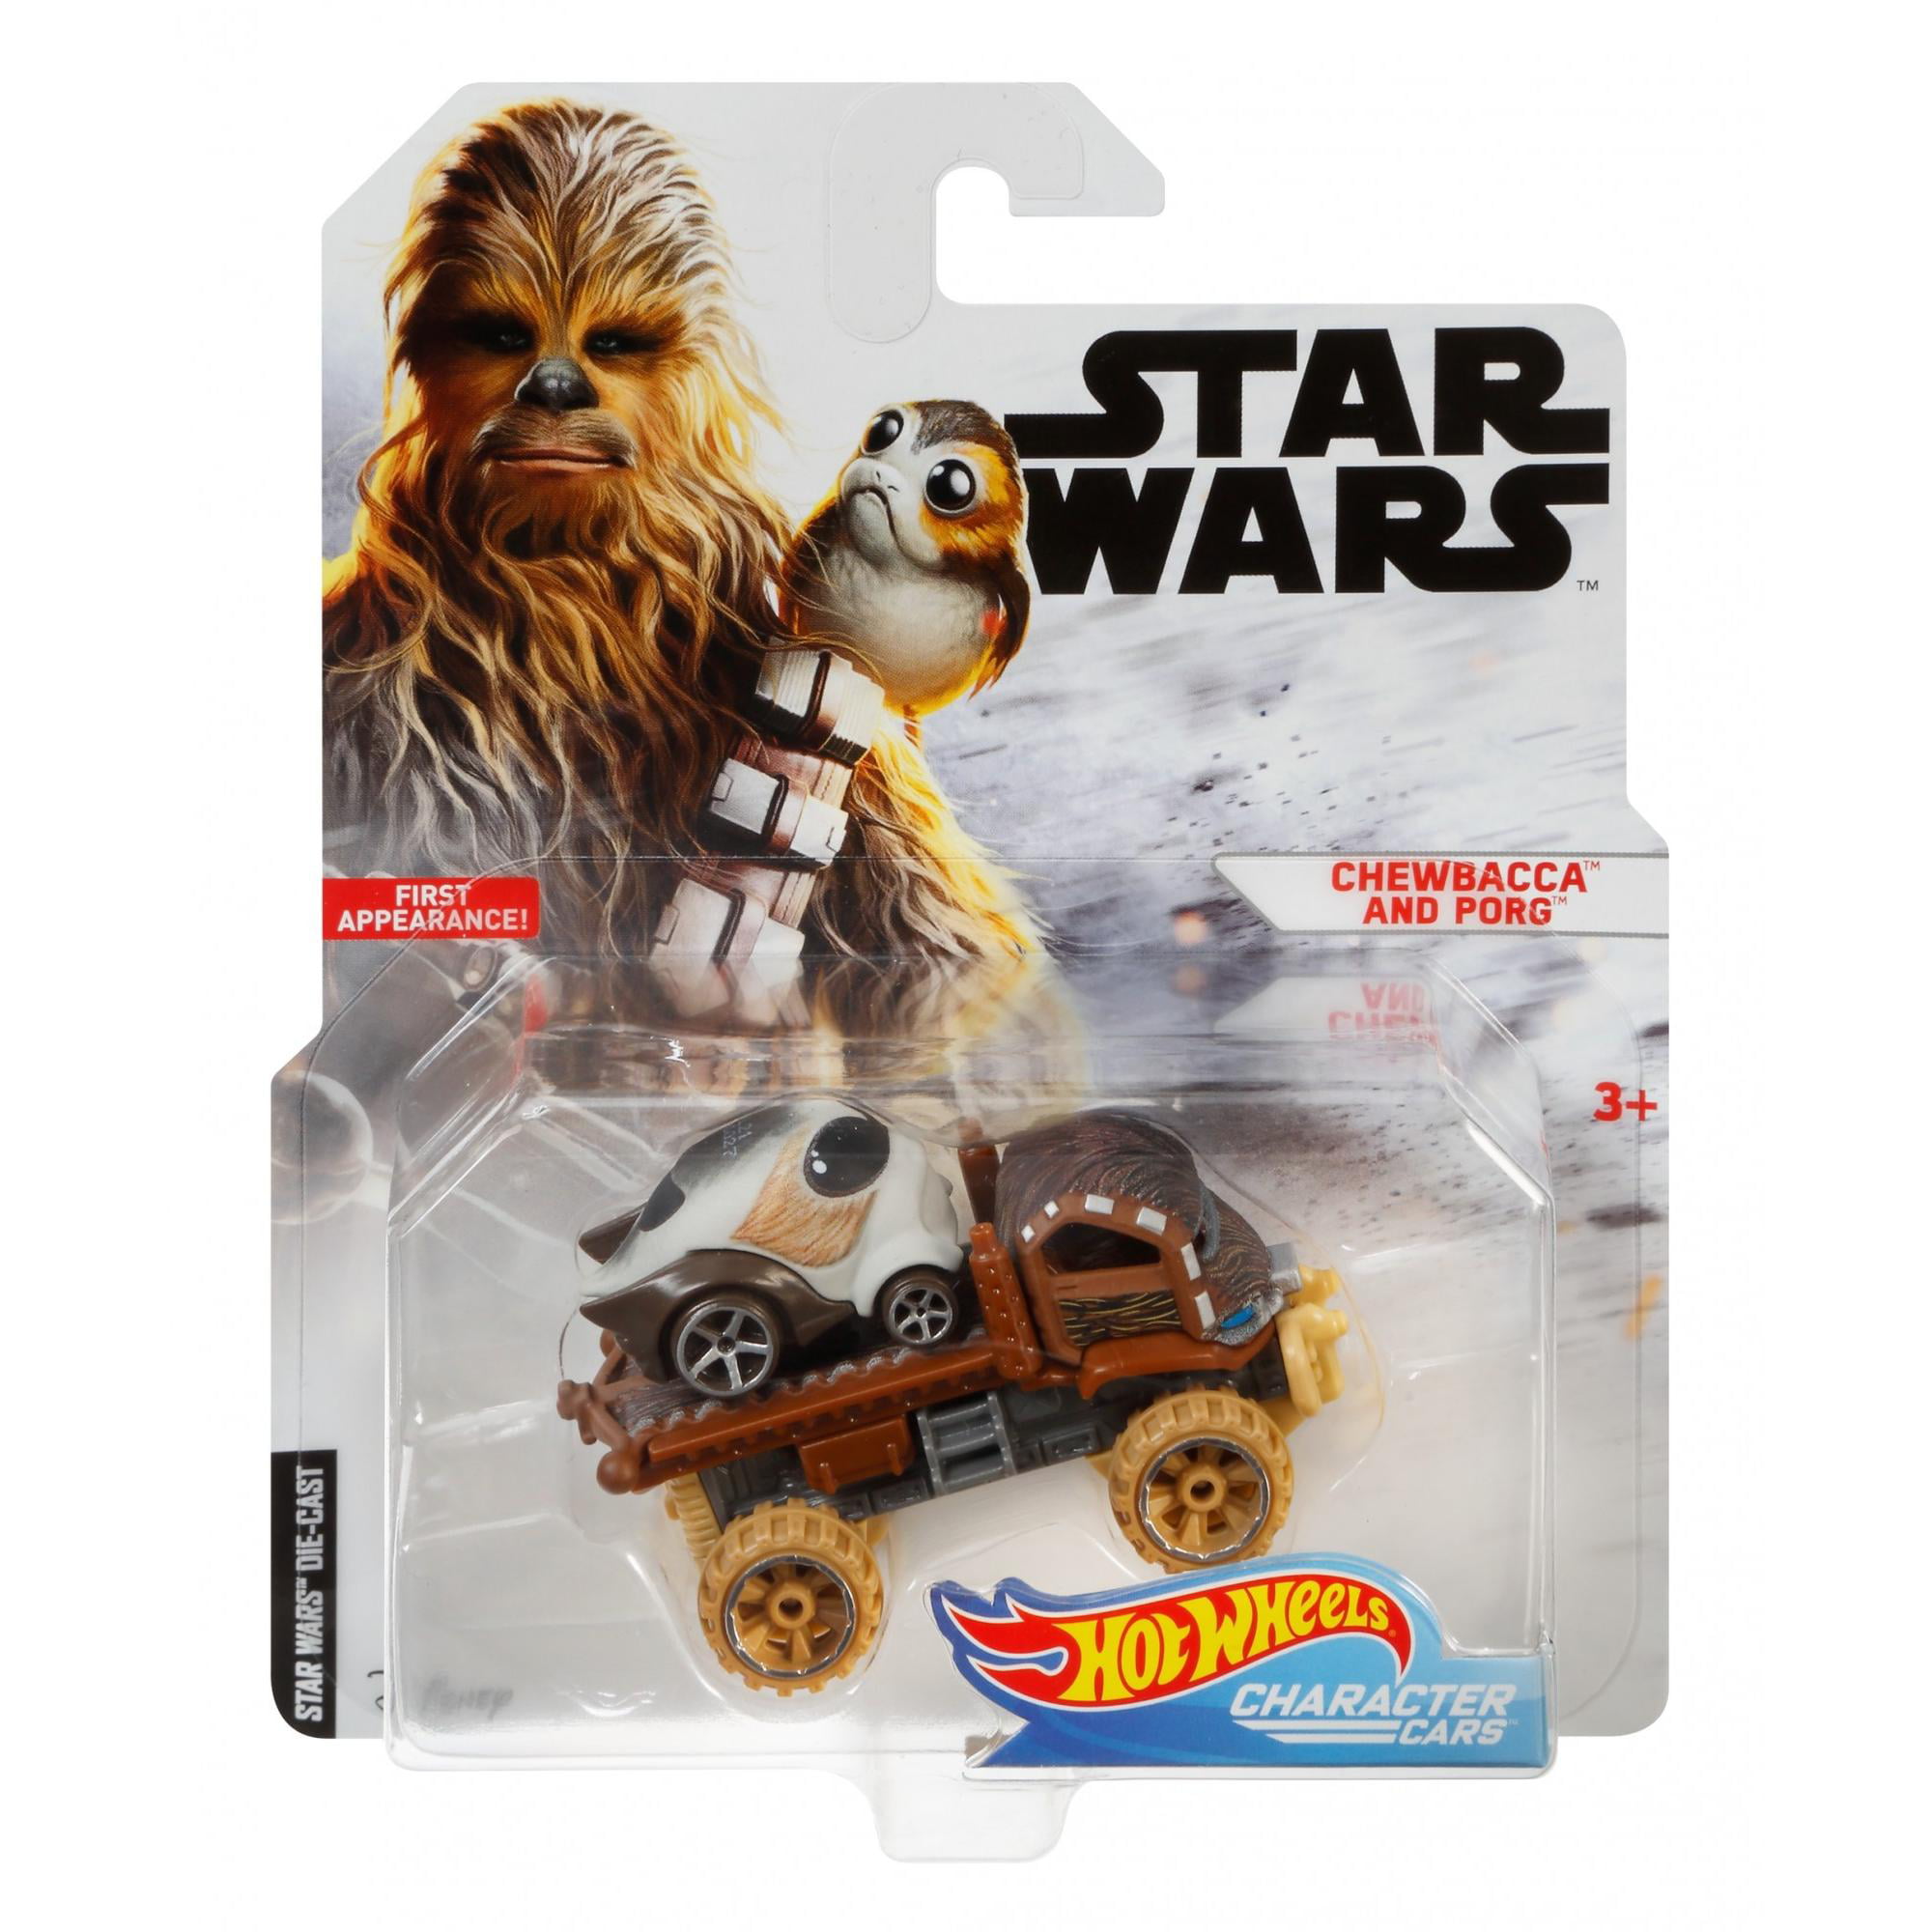 HE6 2019 Hot Wheels Character Cars STAR WARS Chewbacca w/ Action Bowcaster